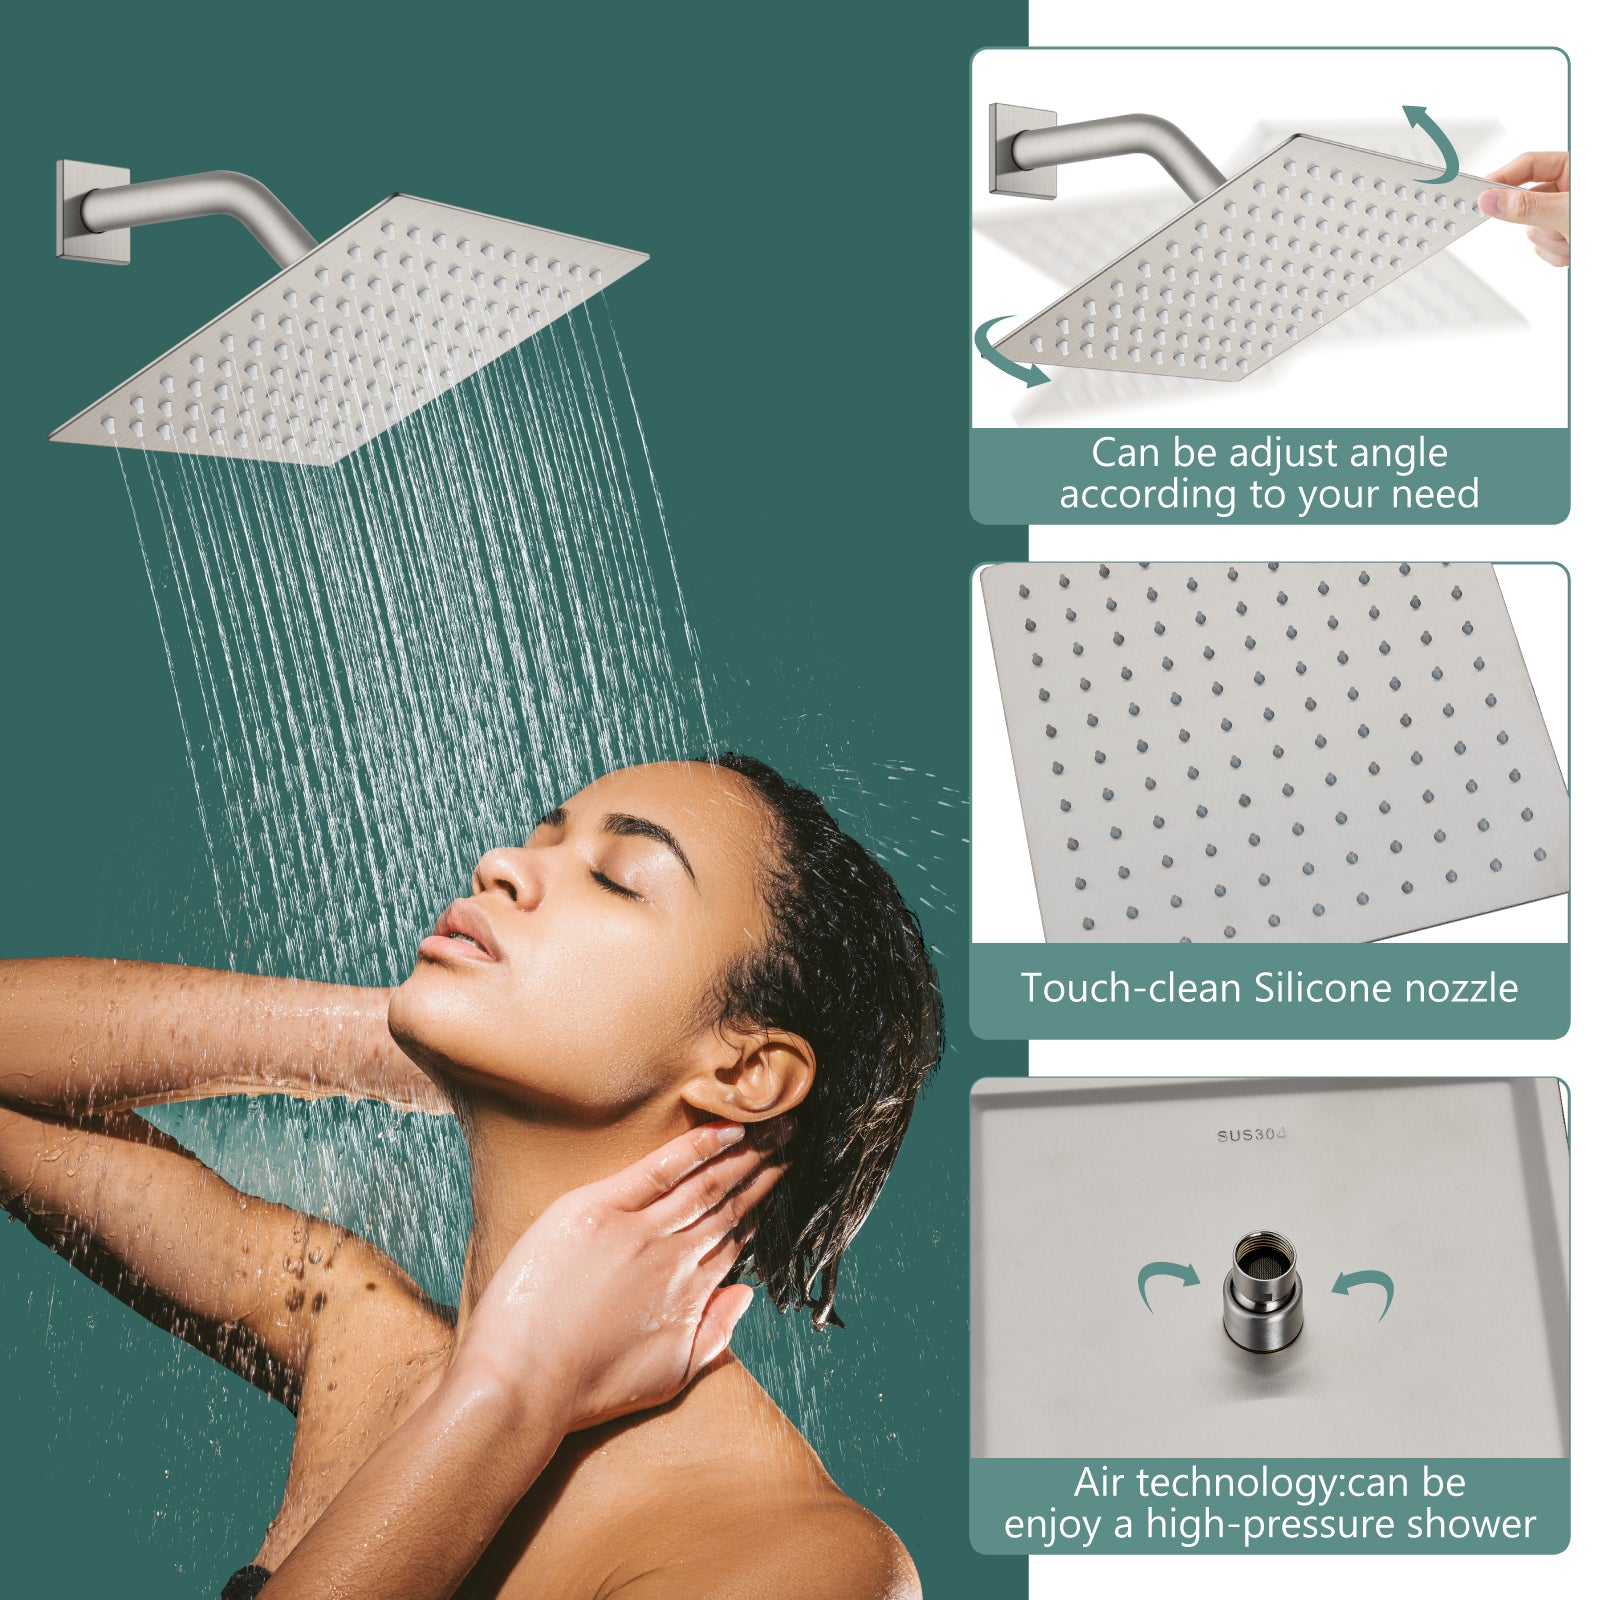 Shower Faucet Set Bathroom Rainfall Shower System Square SUS304 Stainless Steel Showerhead Single Function Shower Trim Kit 1 Handle with Rough-in Valve Male Thread 1/2" NPT